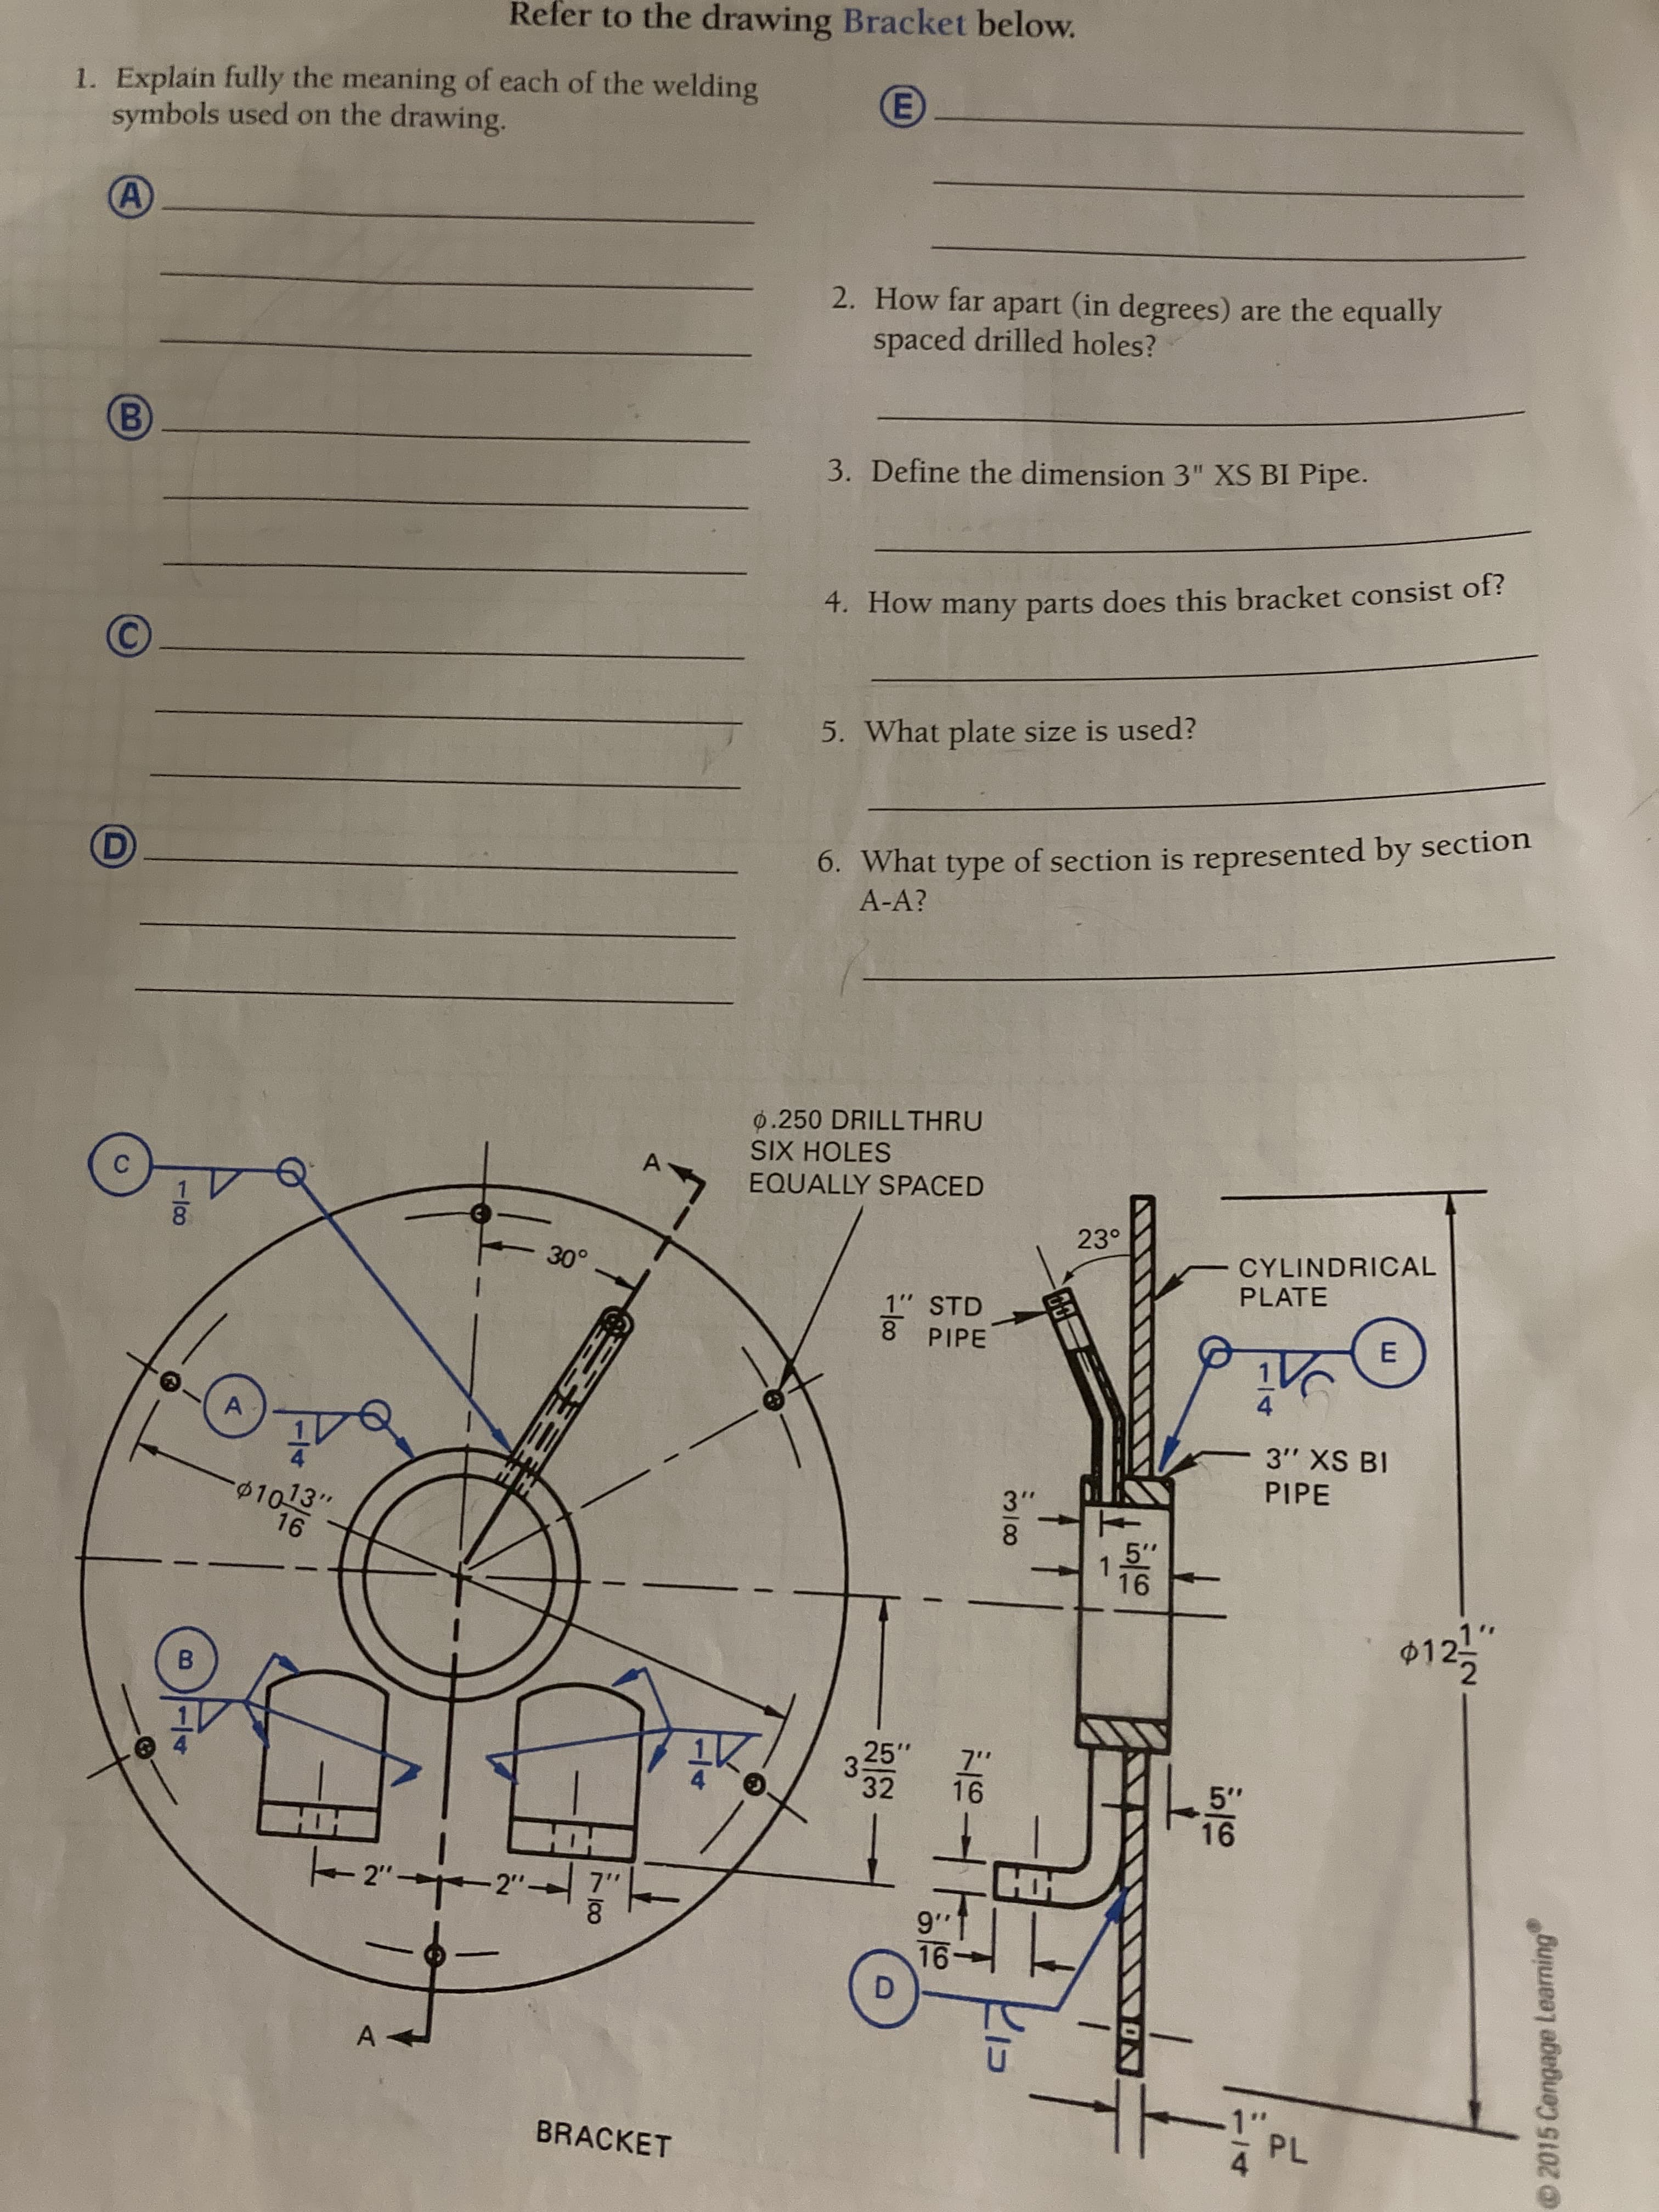 1/8
2015 Cengage Learning
Refer to the drawing Bracket below.
1. Explain fully the meaning of each of the welding
symbols used on the drawing.
2. How far apart (in degrees) are the equally
spaced drilled holes?
3. Define the dimension 3" XS BI Pipe.
4. How many parts does this bracket consist of?
5. What plate size is used?
6. What type of section is represented by section
A-A?
0.250 DRILLTHRU
SIX HOLES
EQUALLY SPACED
23°
CYLINDRICAL
PLATE
1" STD
8 PIPE
E.
A
3" XS BI
PIPE
01013"
3"
8.
$12!
B
3.
32
25"
337
5"
2"
HH
!..6
D.
BRACKET
